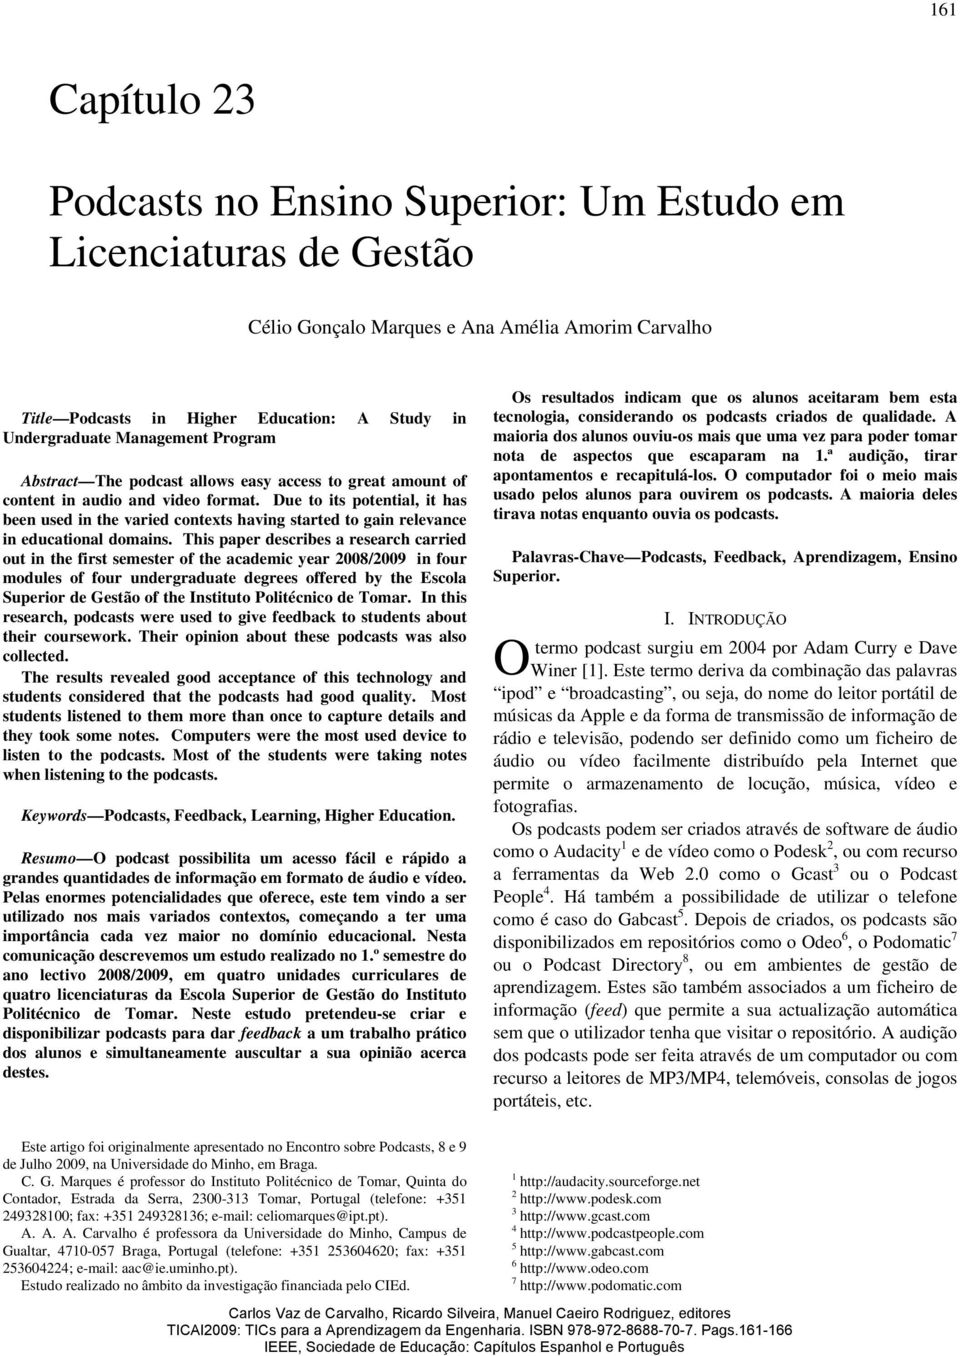 This paper describes a research carried out in the first semester of the academic year 2008/2009 in four modules of four undergraduate degrees offered by the Escola Superior de Gestão of the